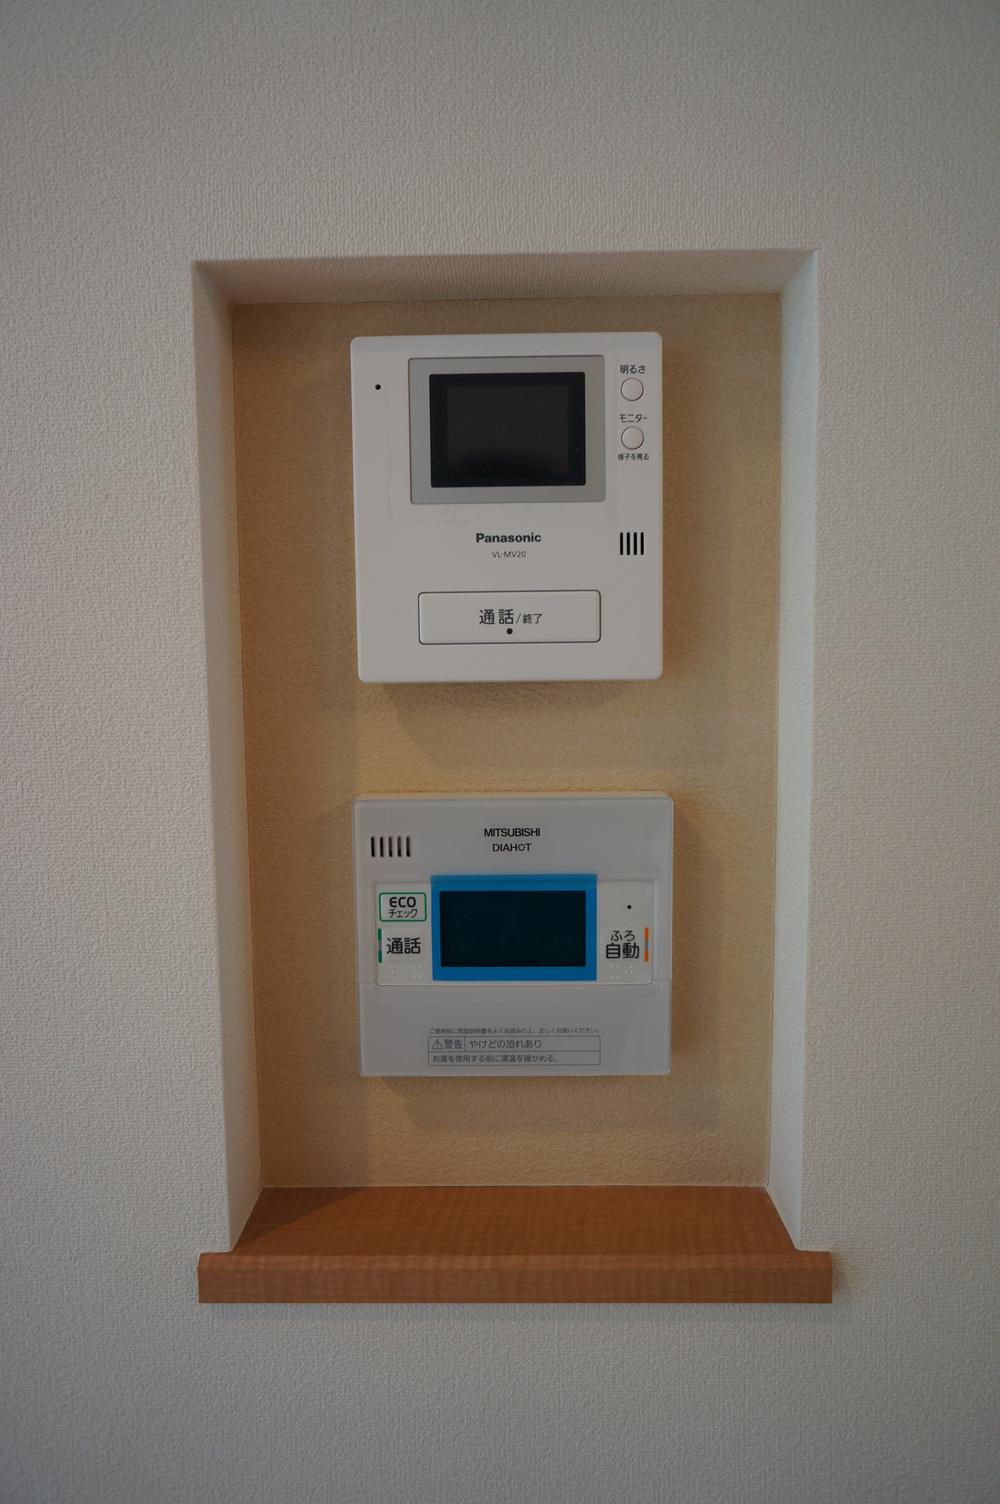 Security equipment. Safe TV monitor with intercom